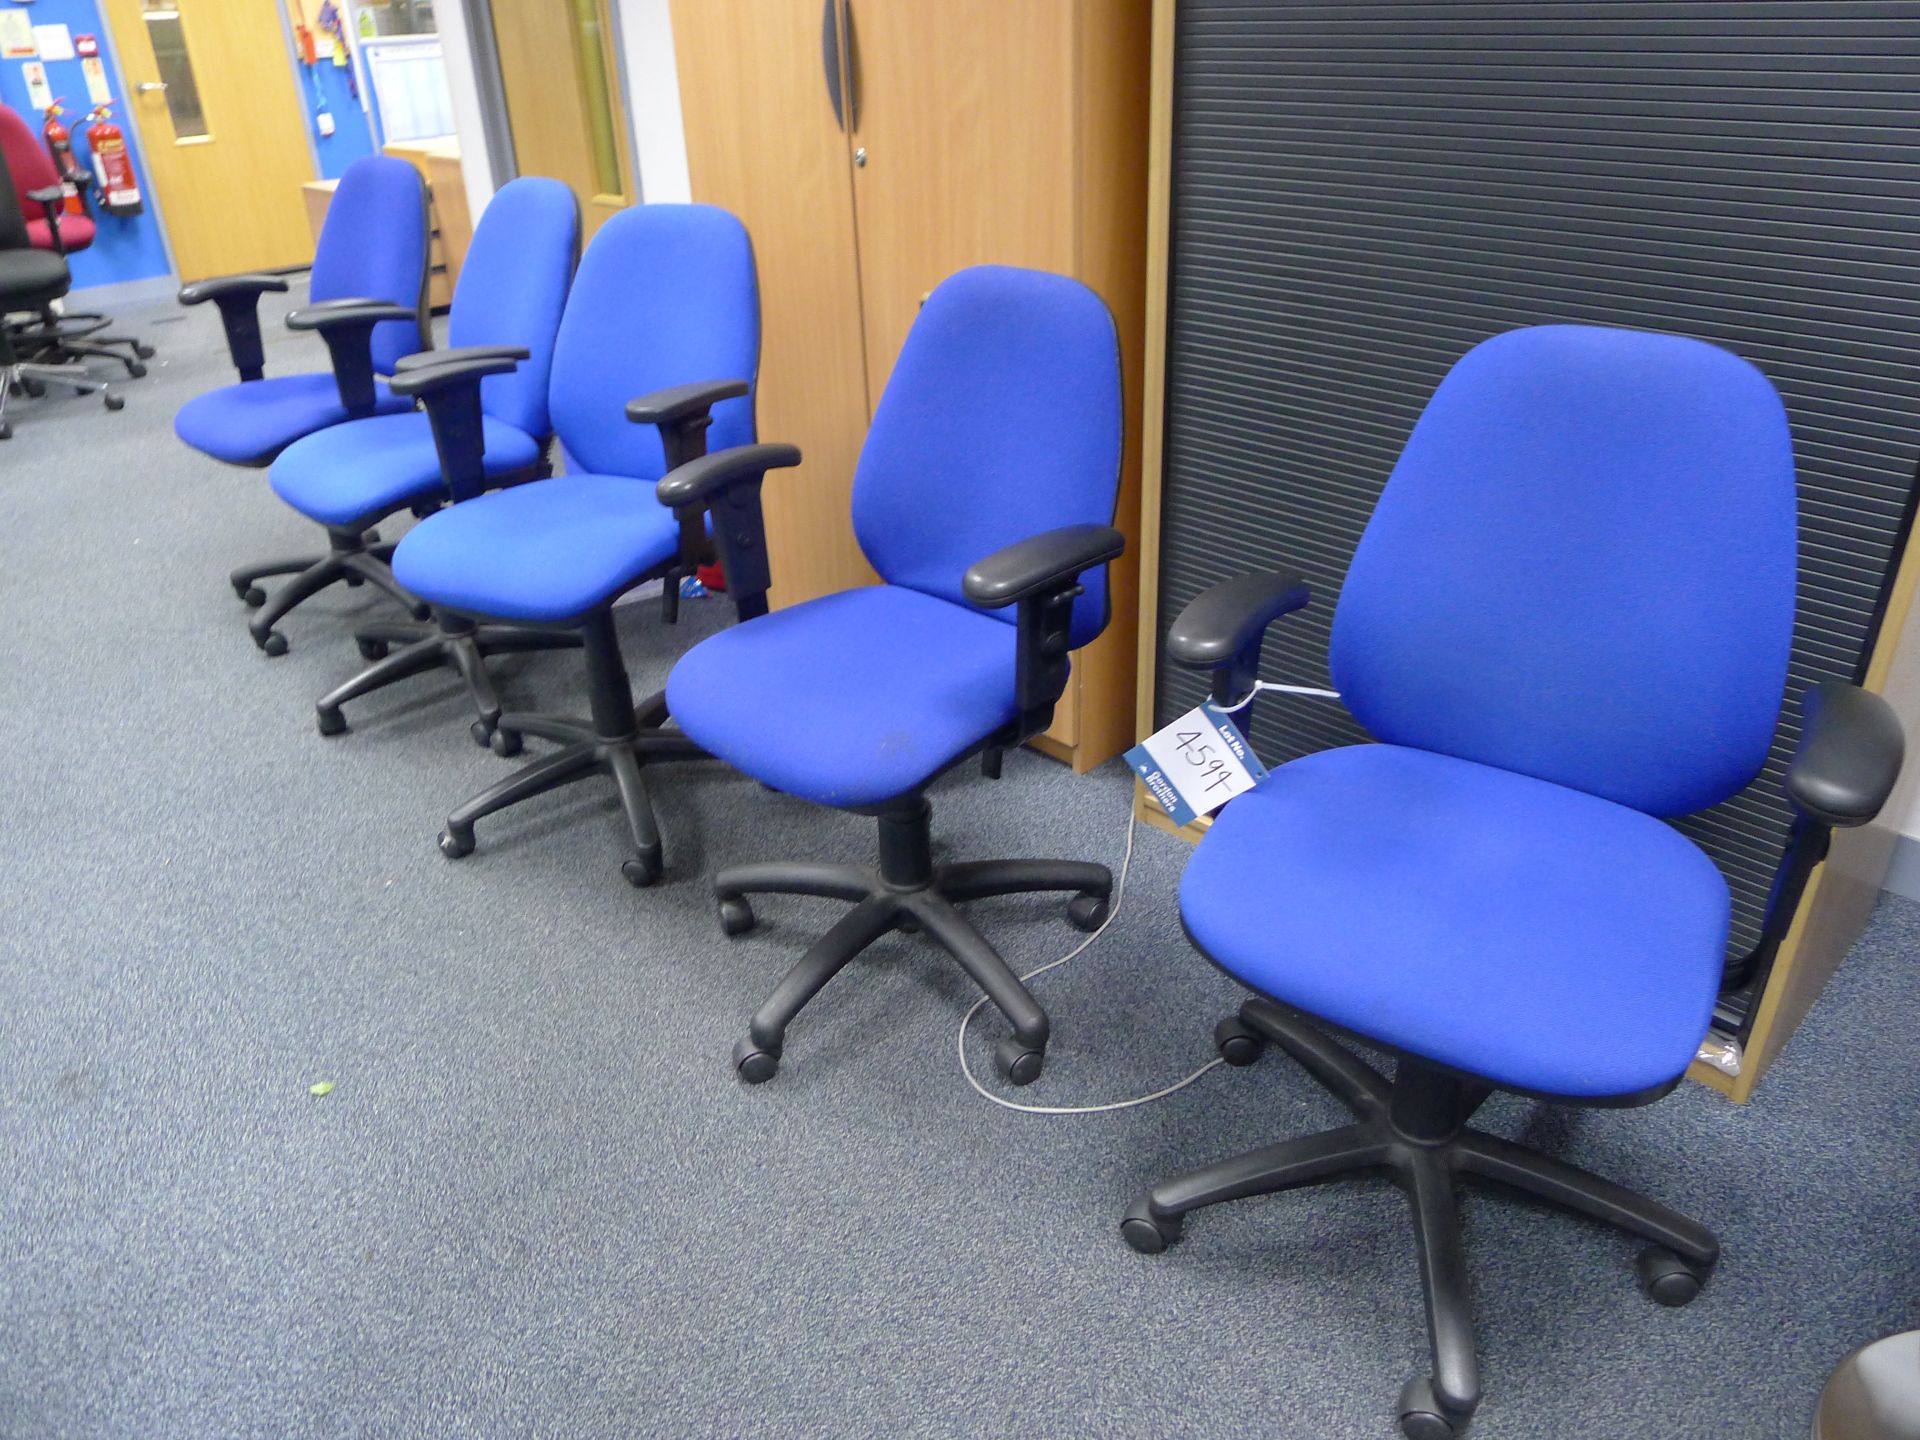 5x Blue Cloth Upholstered Swivel Chairs: Unit 500,